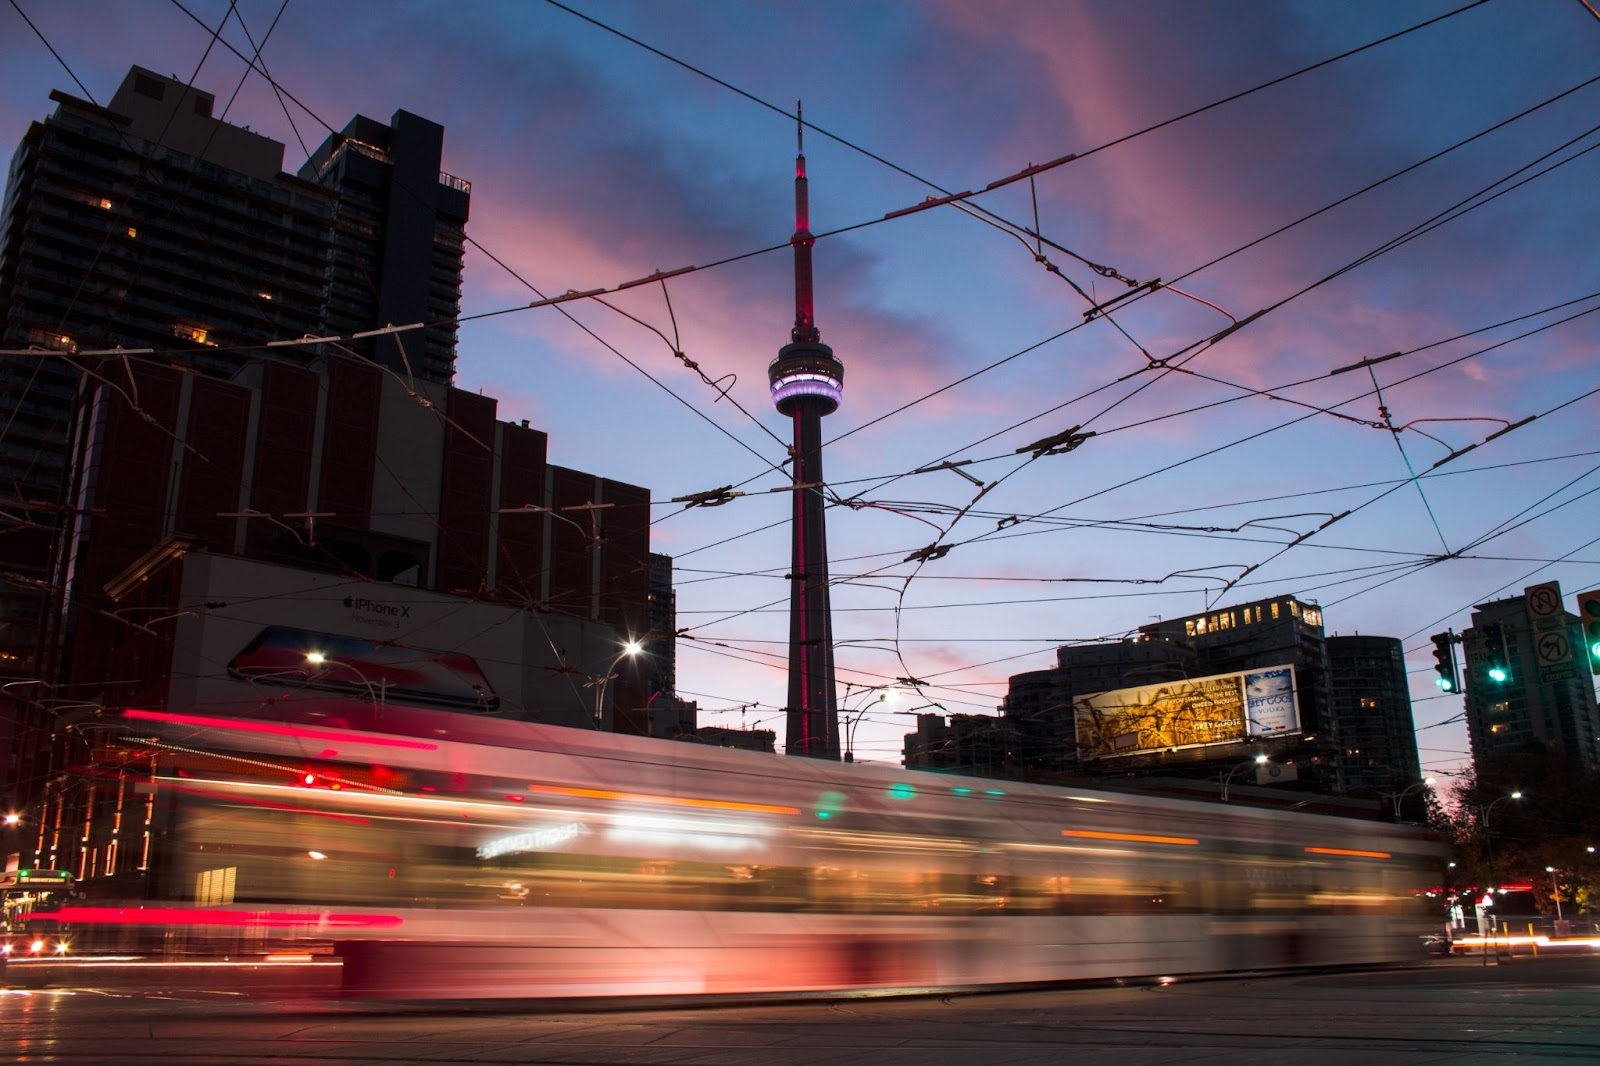 CN Tower and Street Car